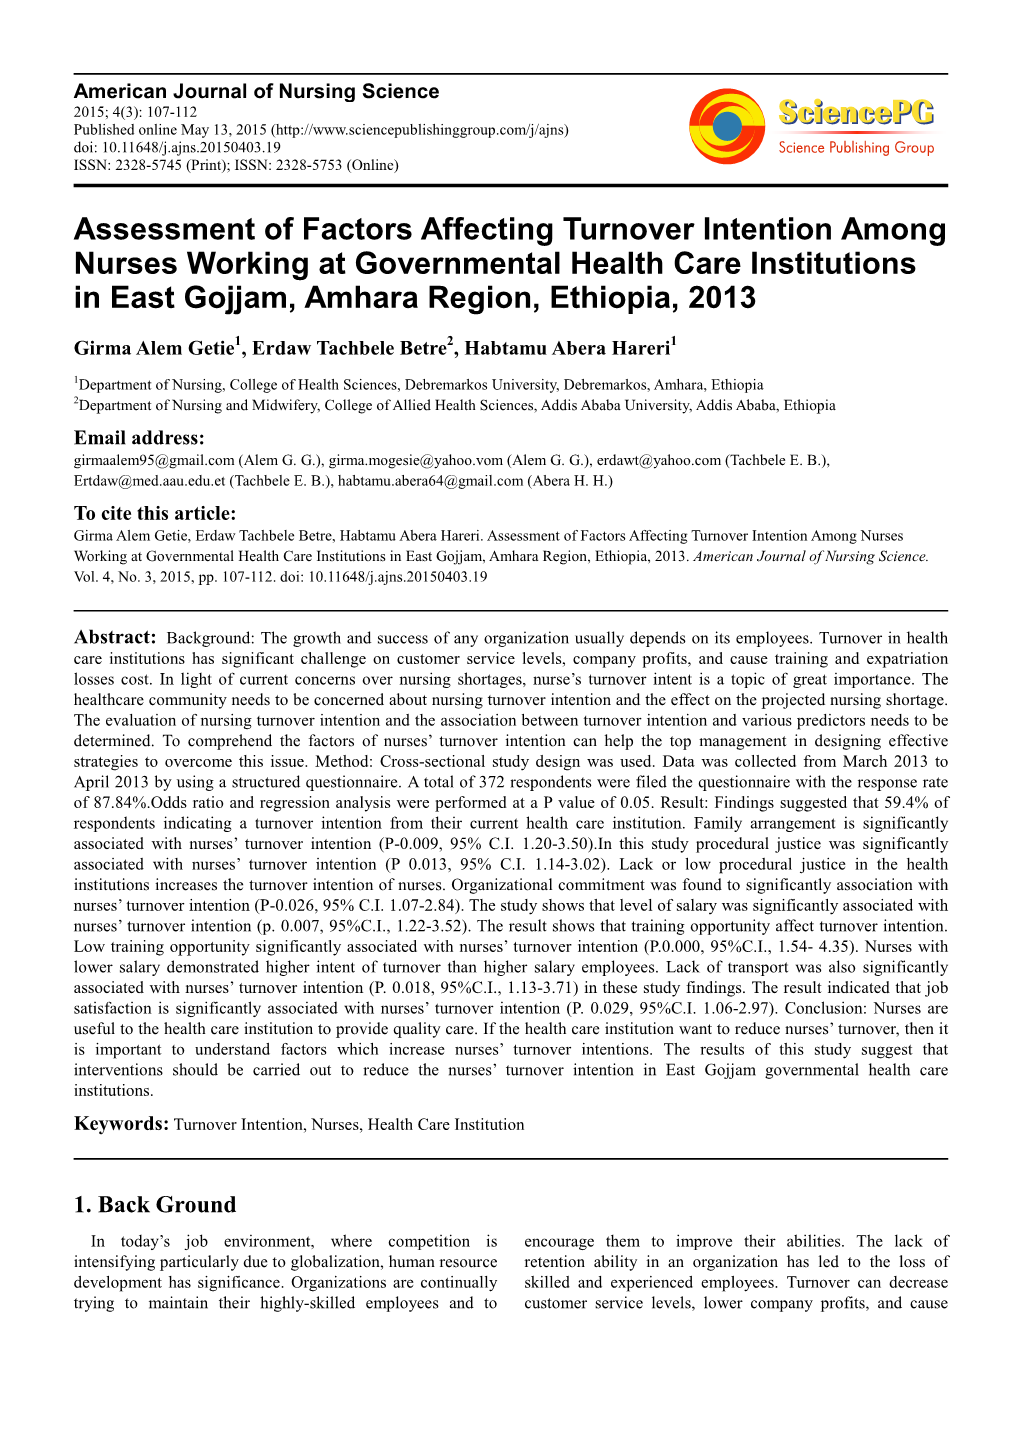 Assessment of Factors Affecting Turnover Intention Among Nurses Working at Governmental Health Care Institutions in East Gojjam, Amhara Region, Ethiopia, 2013